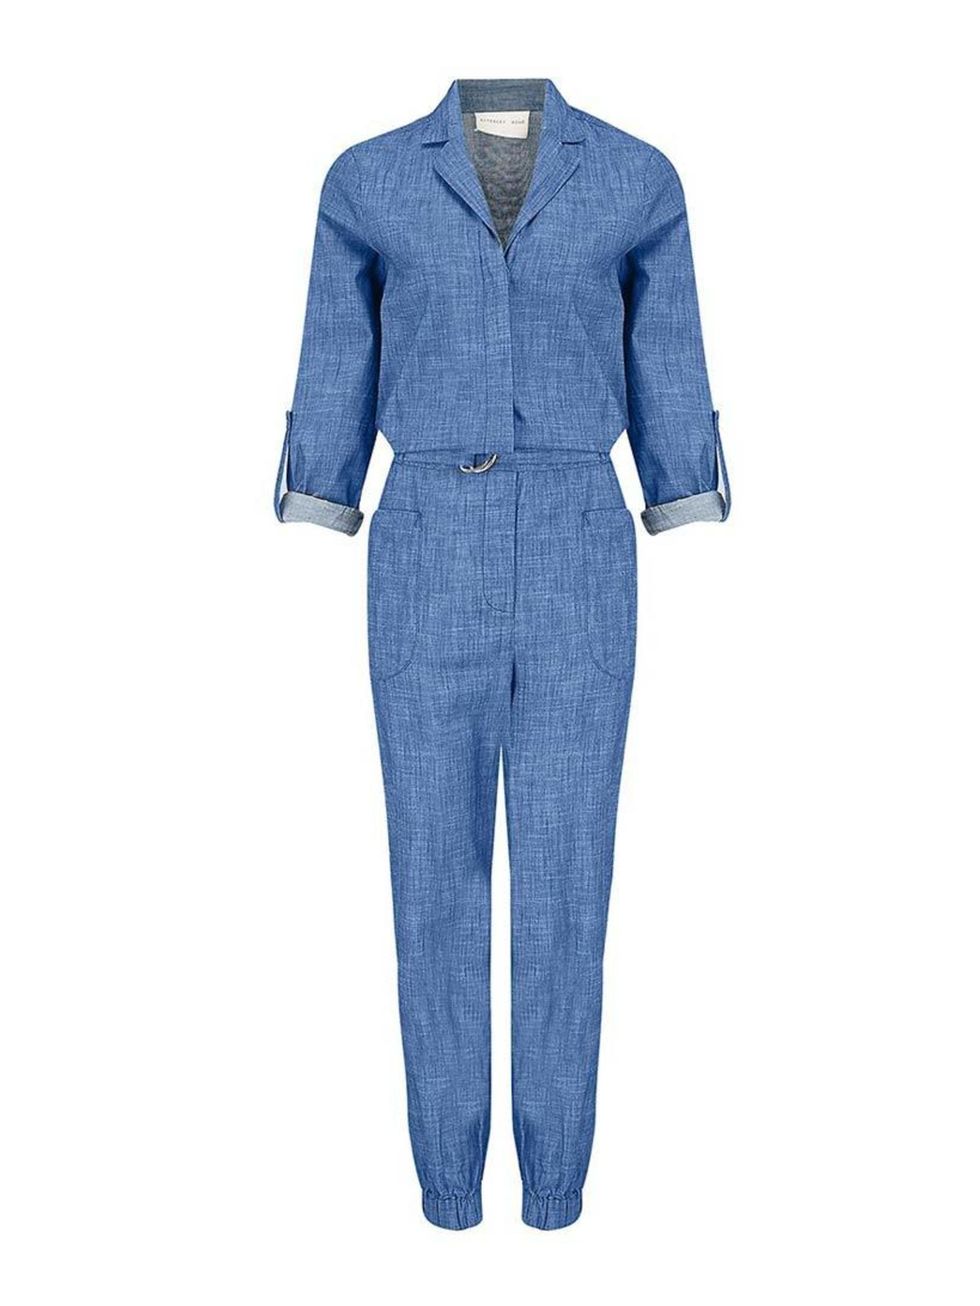 <p><a href="http://www.atterleyroad.com/chambray-jumpsuit-1.html" target="_blank">Atterley Road</a> jumpsuit, £75</p>